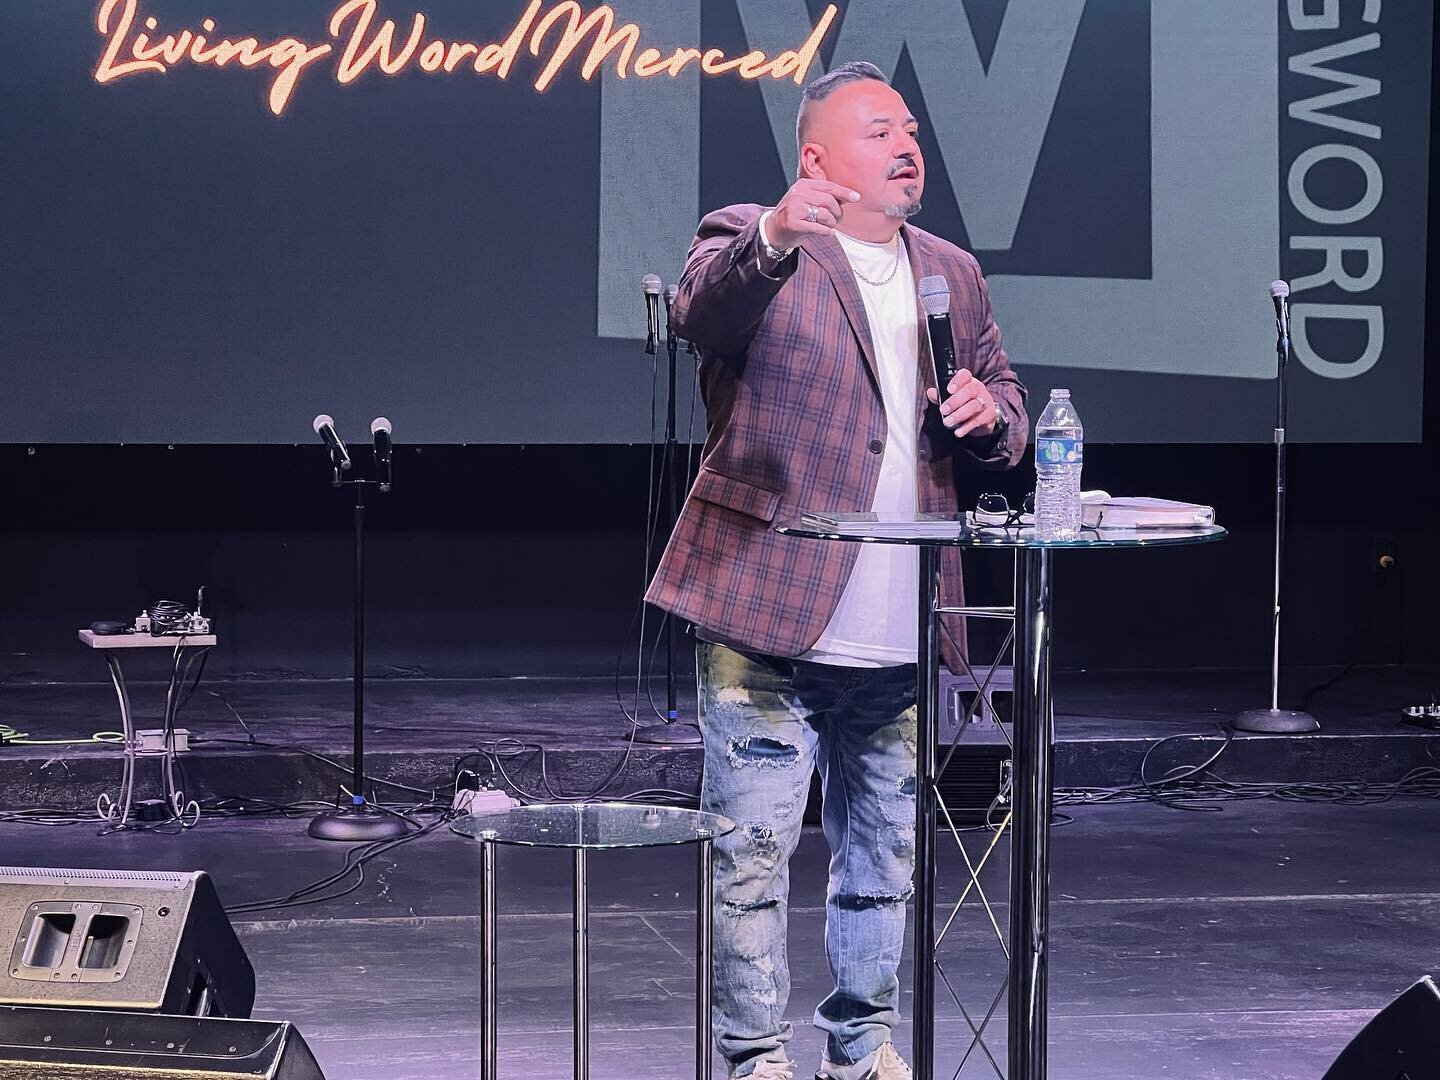 Todays Service was Powerful! We had Special Guest Speaker Pastor Fernando Lopez from Living Word of Merced @mercedlivingword If you&rsquo;d like to view the full service be sure to visit our Facebook and YouTube page located in our bio! We hope you h